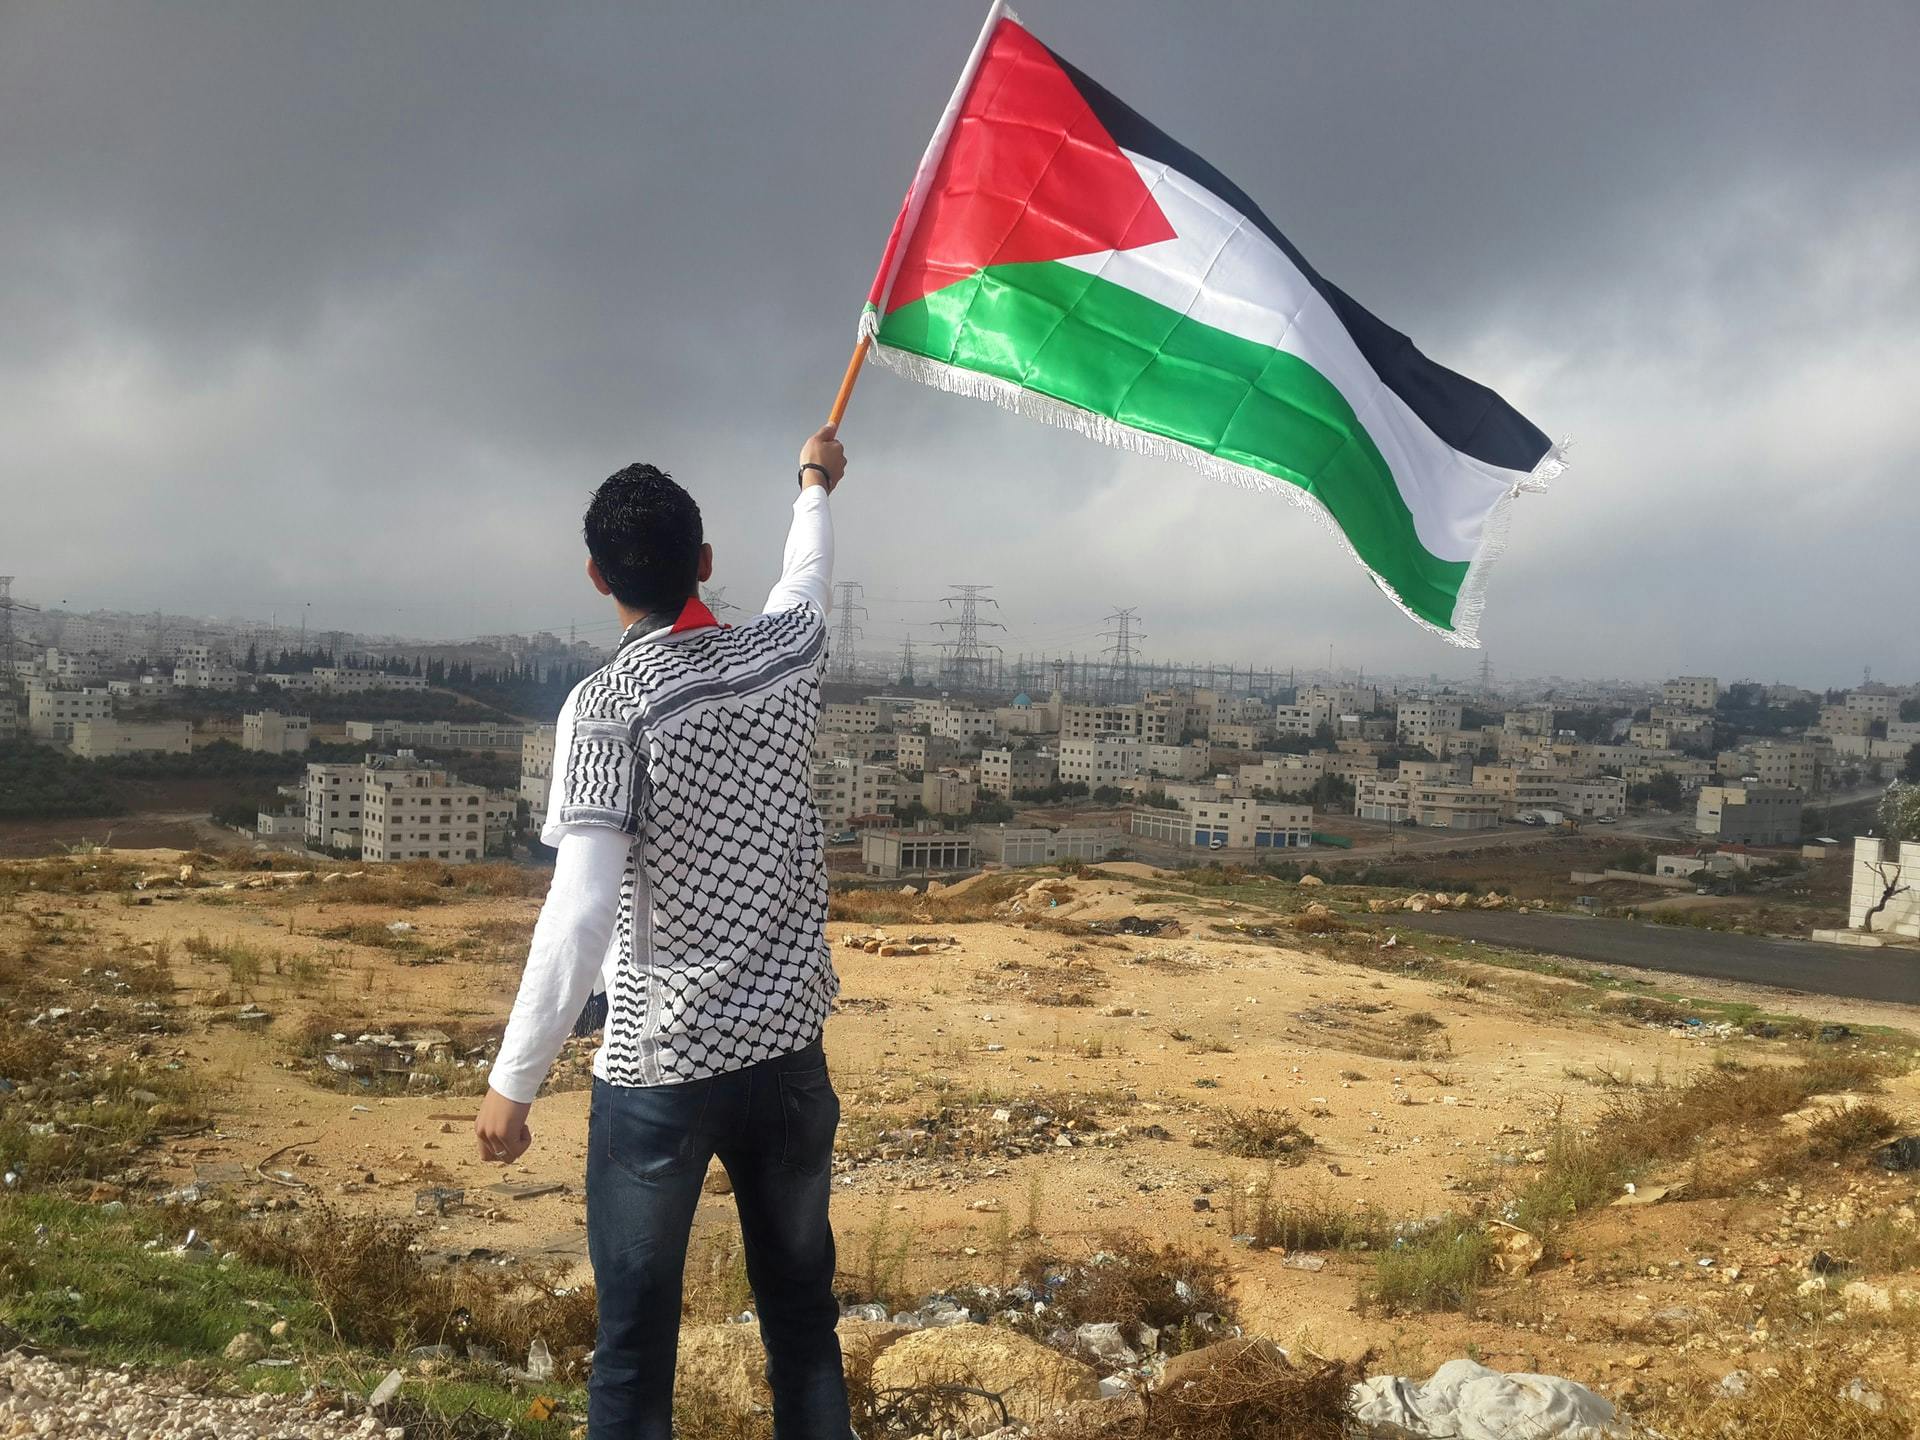 A young man waving a Palestinian flag. In the background Palestinian houses.